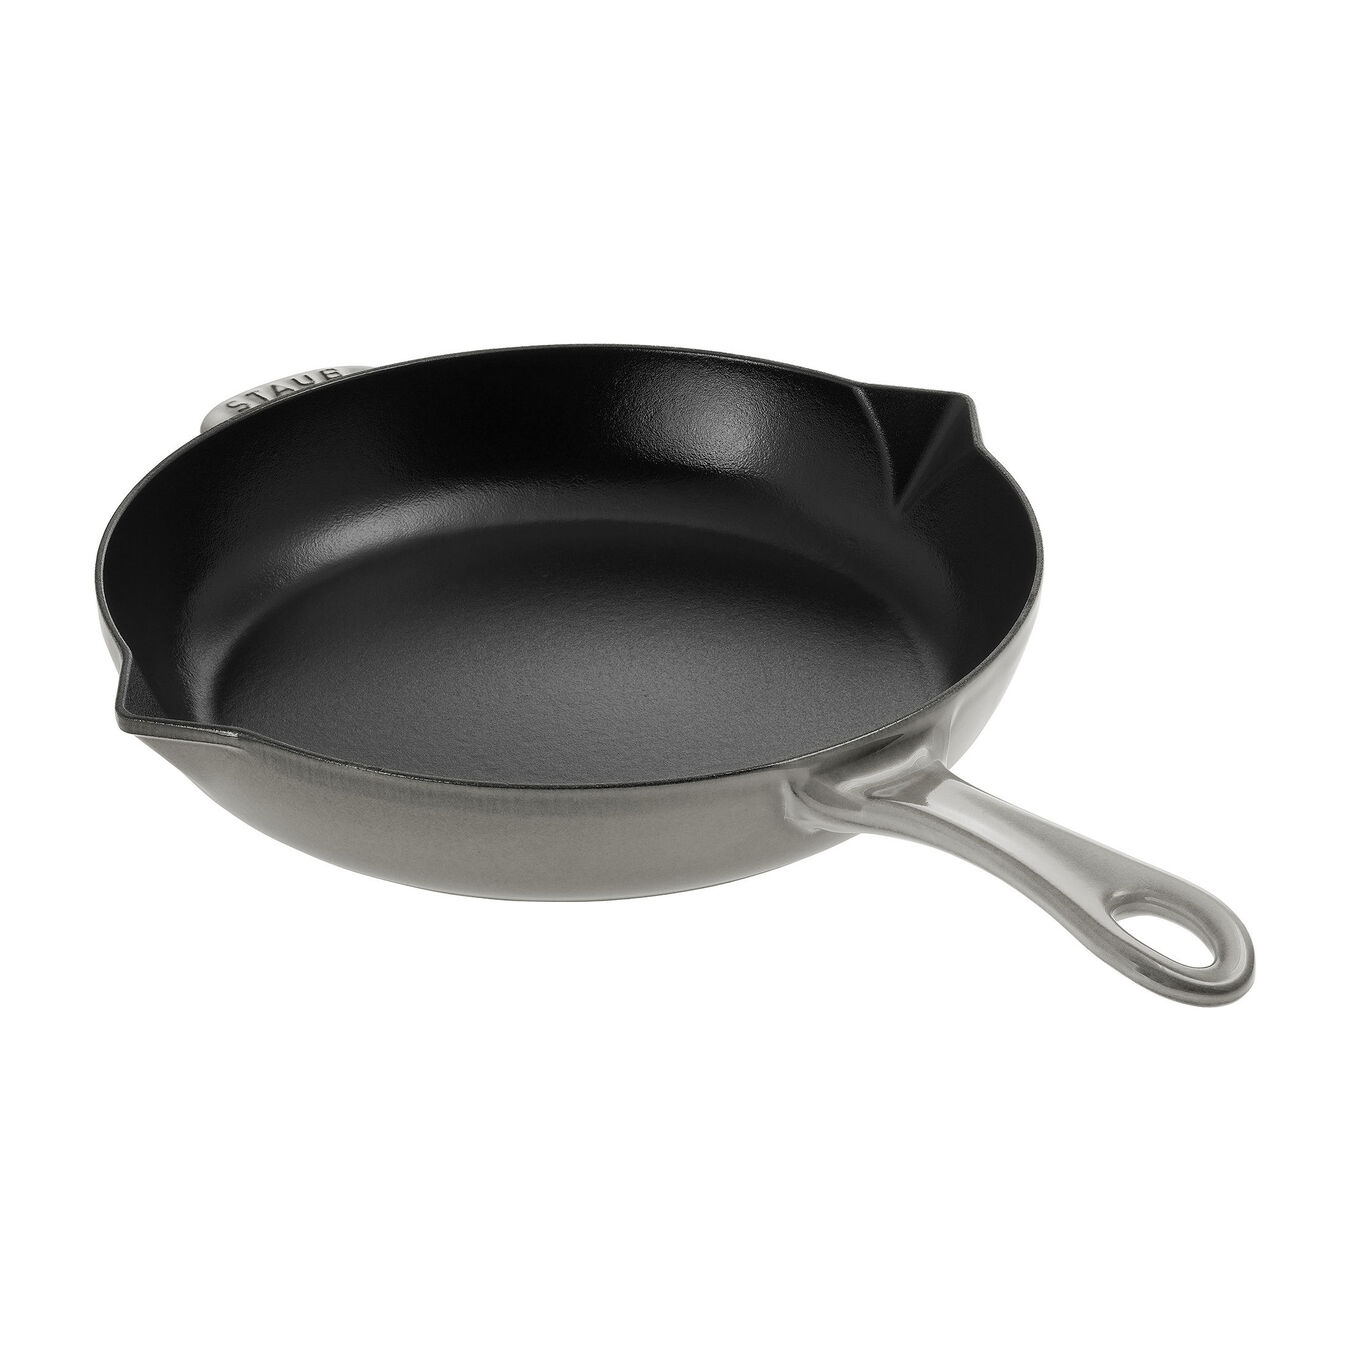 26 cm Cast iron Frying pan with pouring spout graphite-grey,,large 2